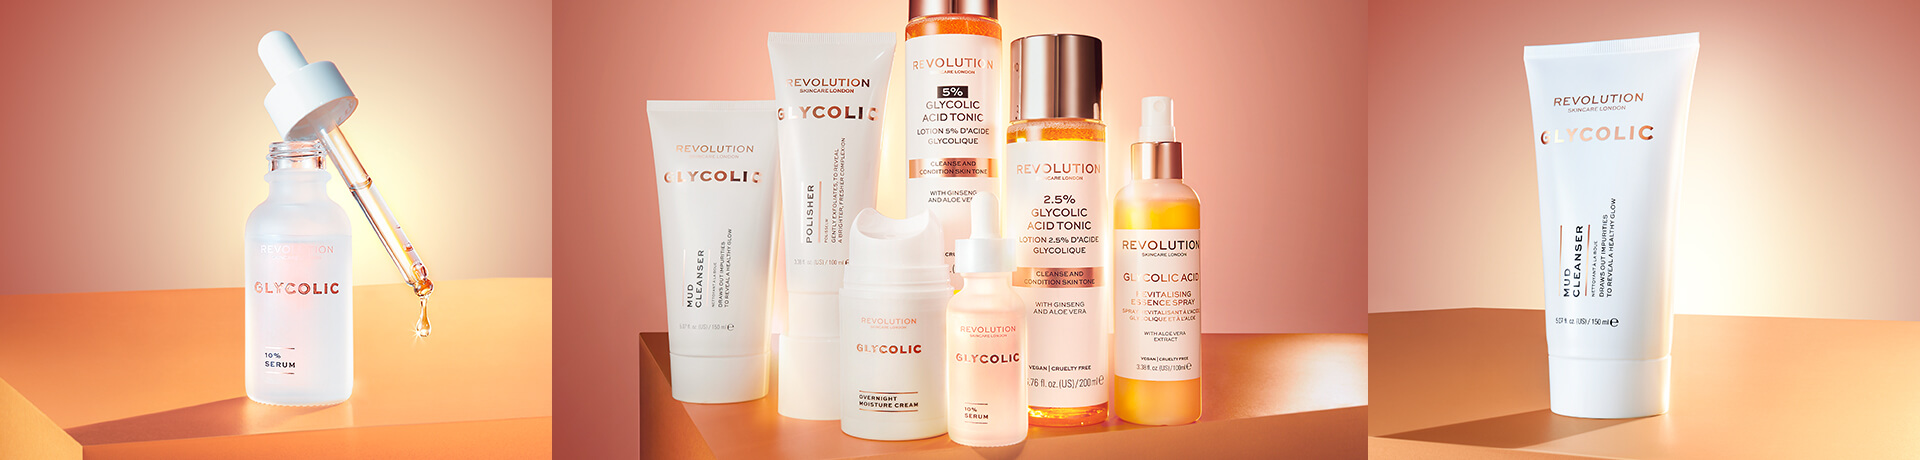 A cosmetic scientist’s guide to Glycolic Acid